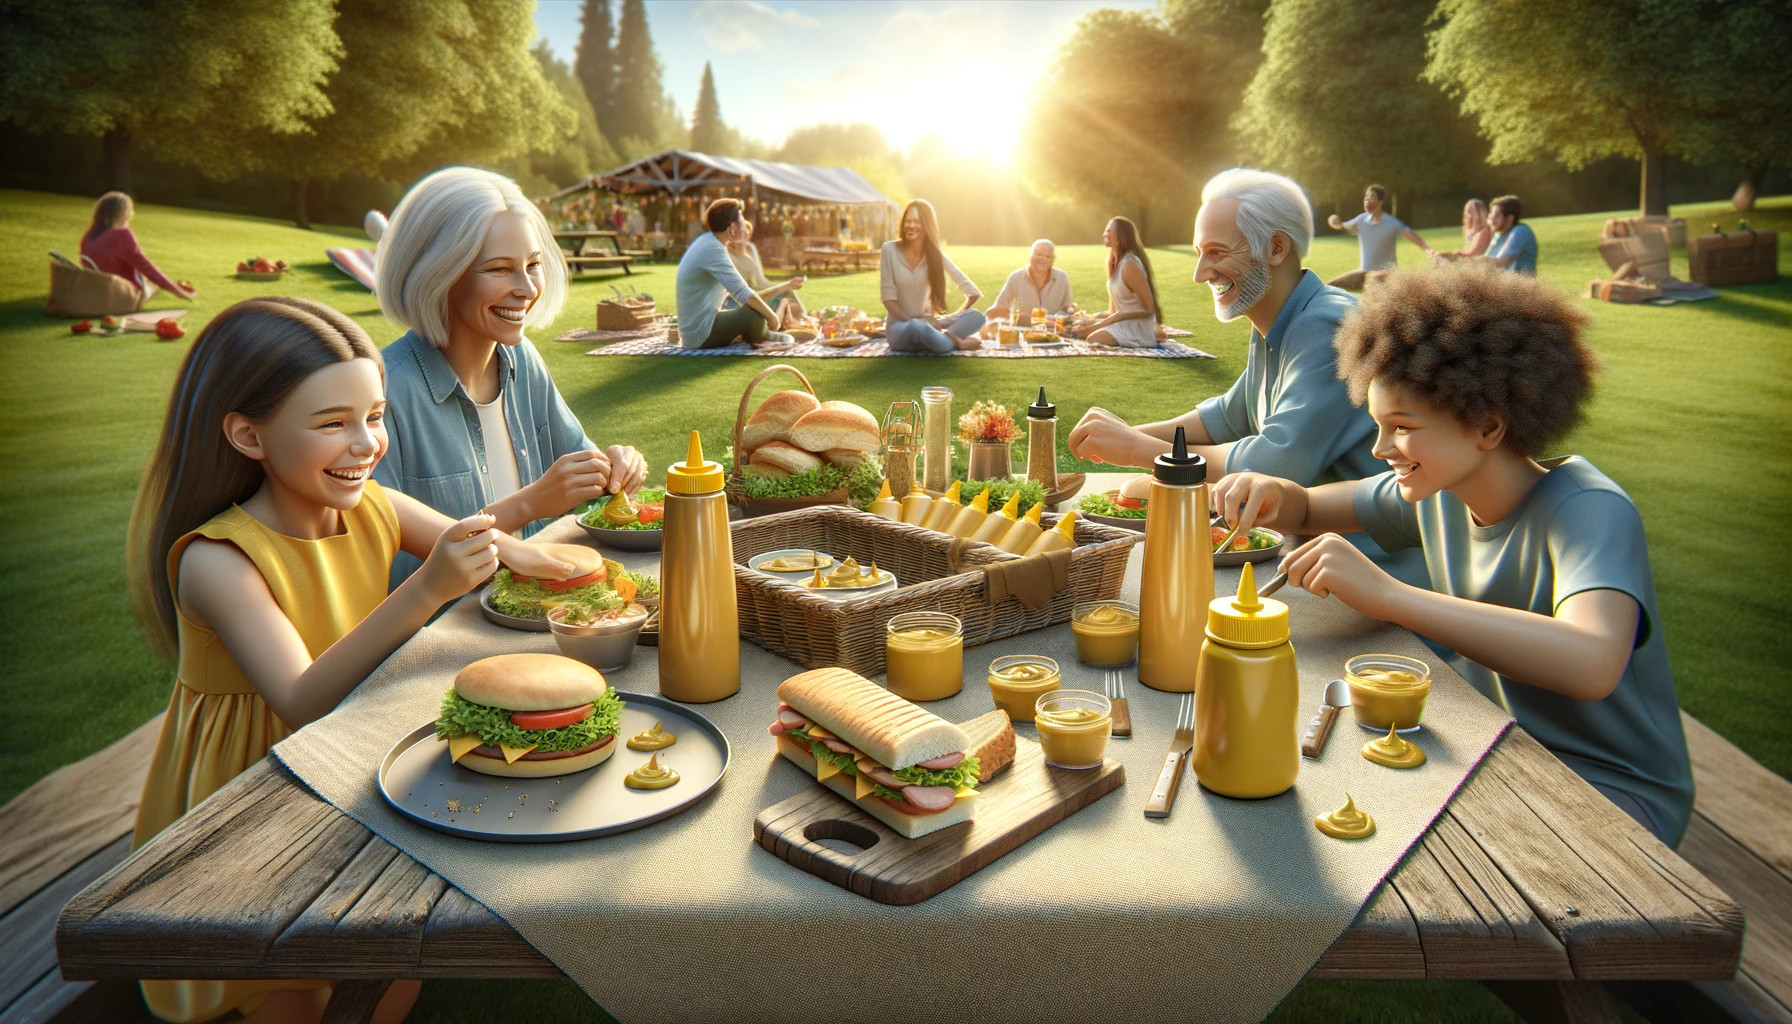 a family enjoying a picnic outdoors, with various dishes featuring mustard.